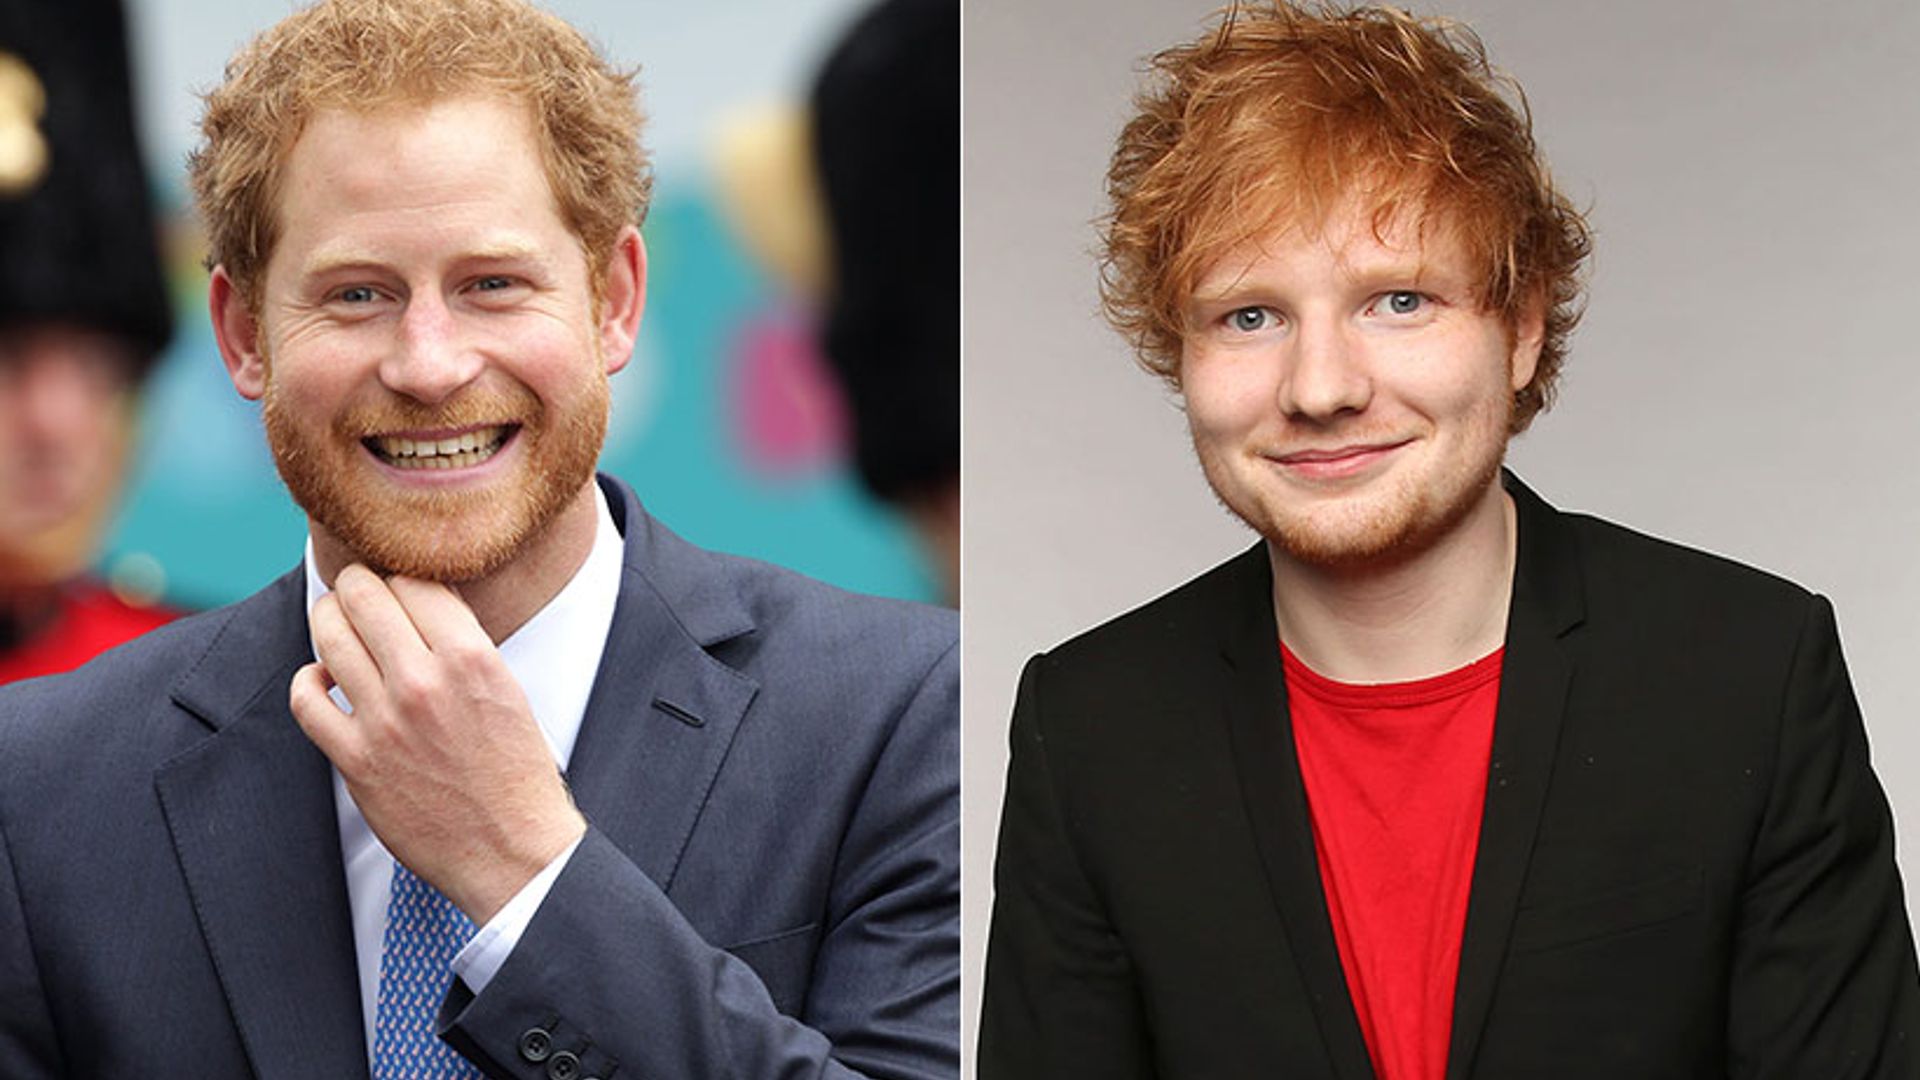 Prince Harry left in stitches after being told he looks like Ed Sheeran by a schoolgirl